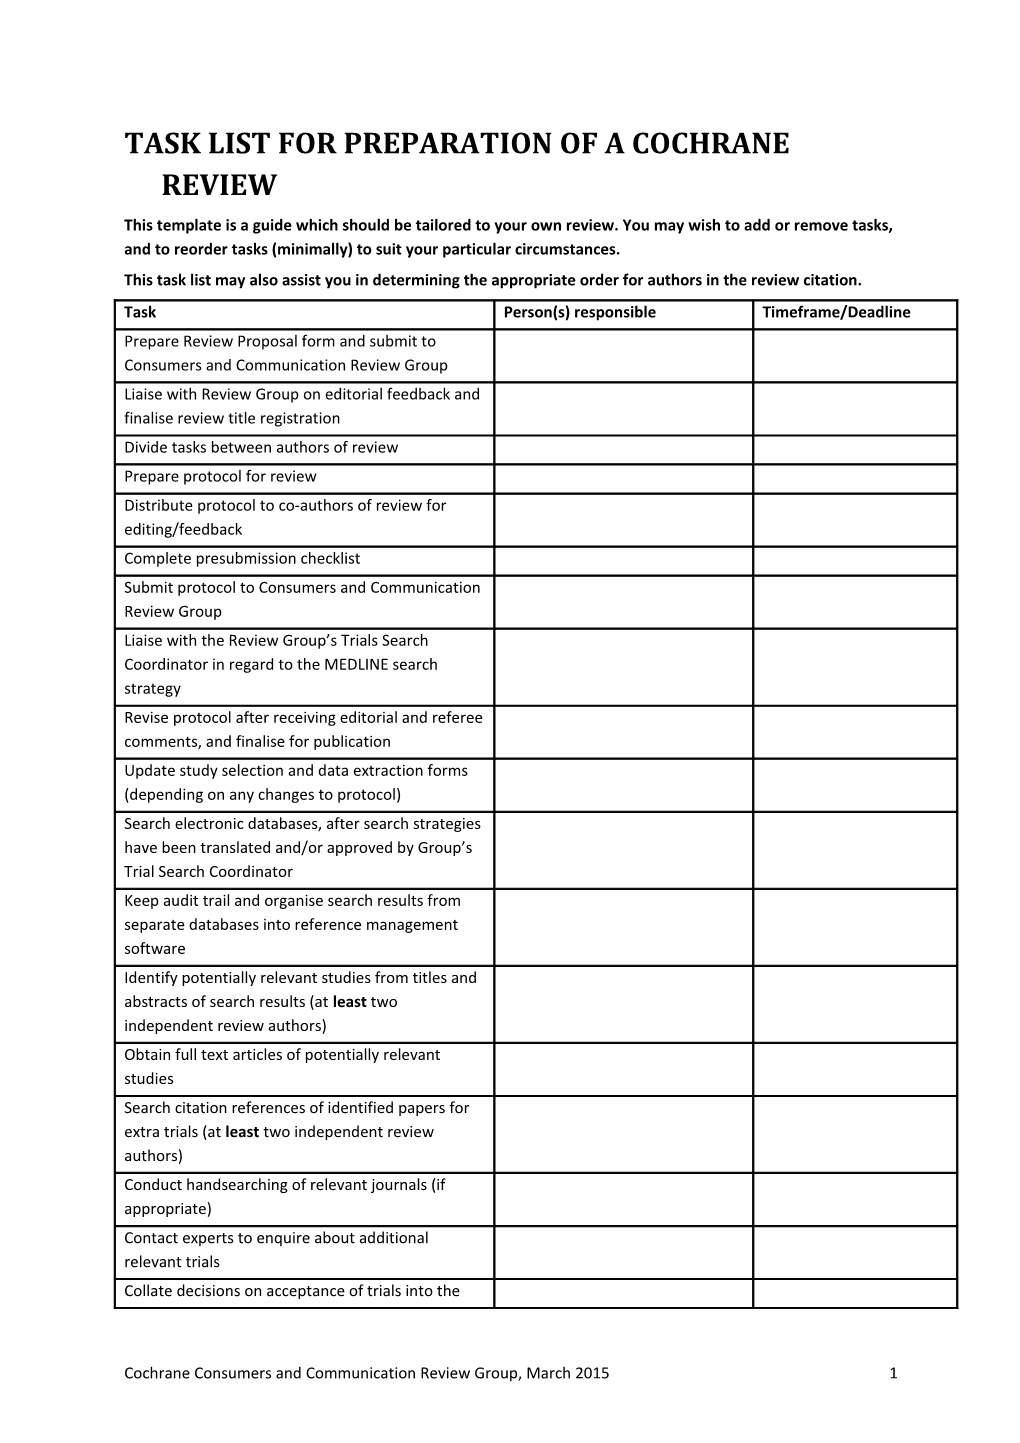 Task List for Preparation of a Cochrane Review